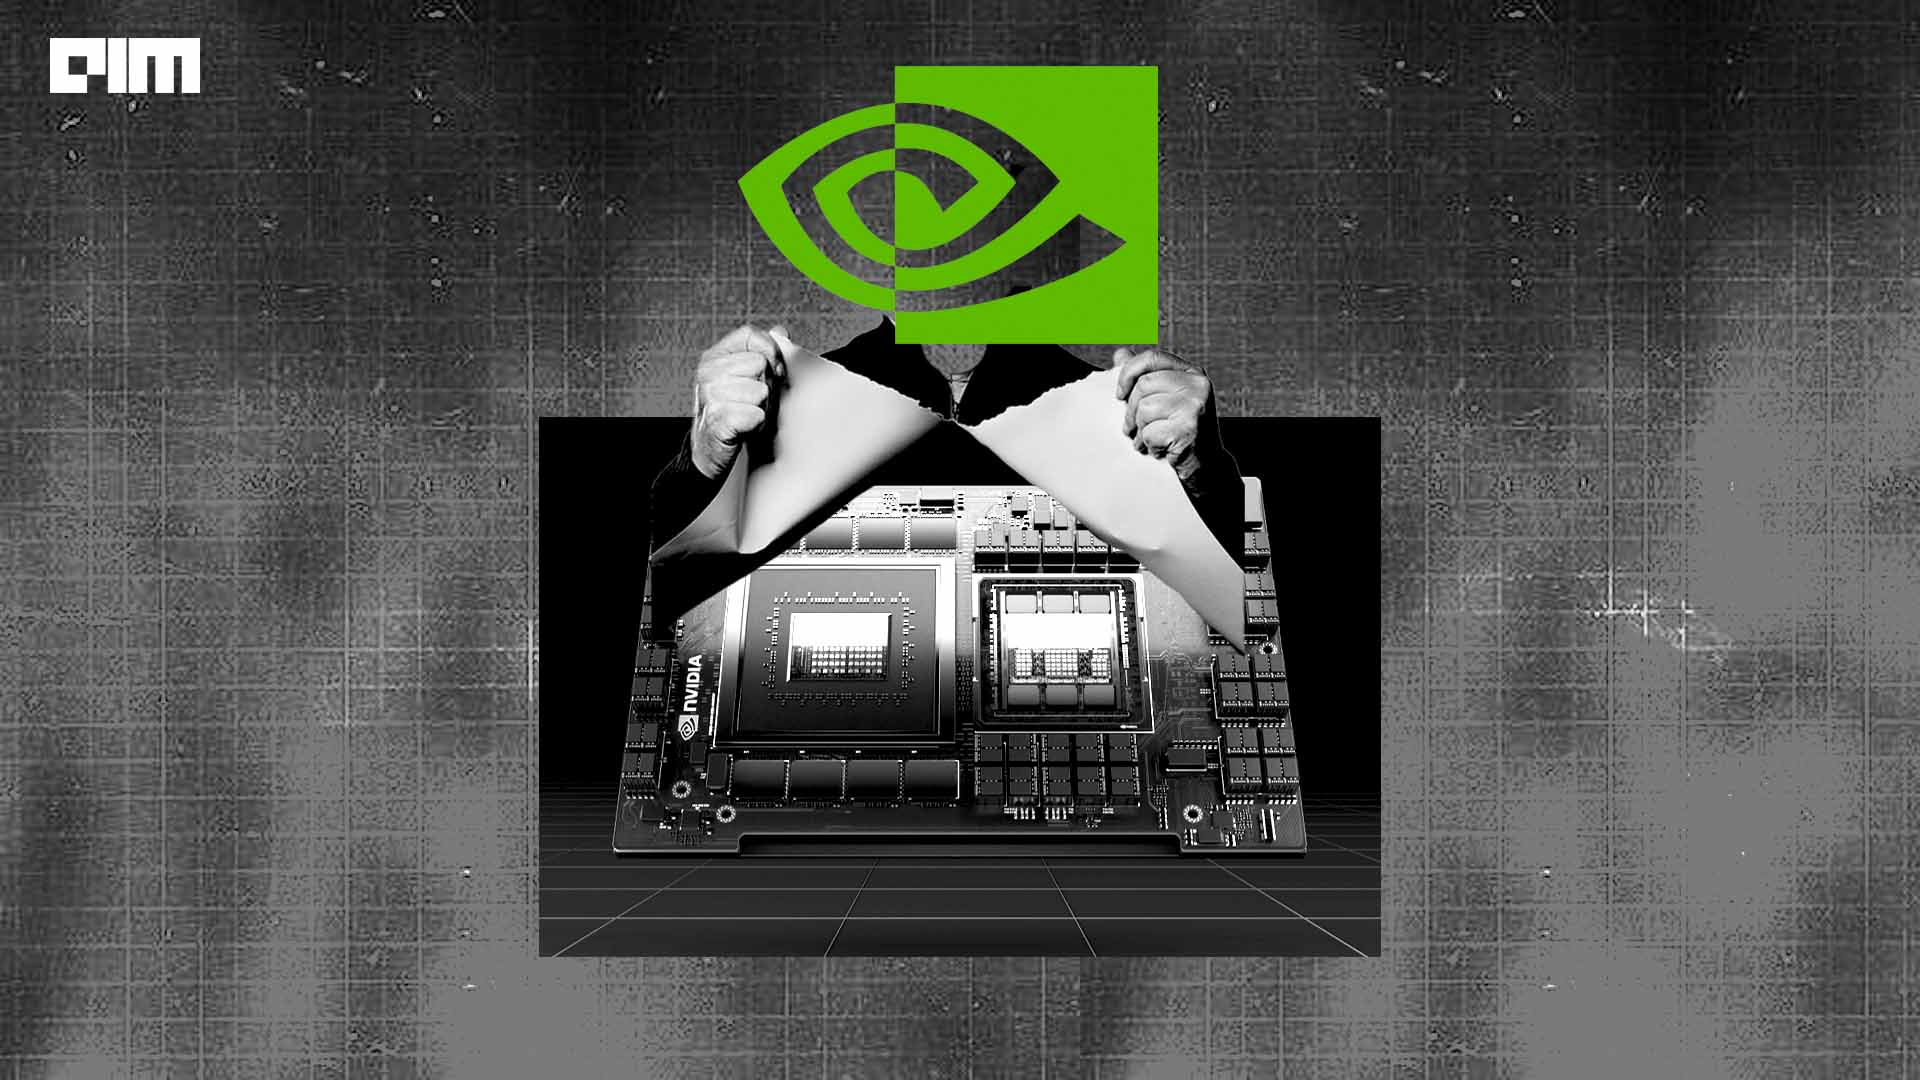 NVIDIA Catches Up to AMD, Intel with MCM Design